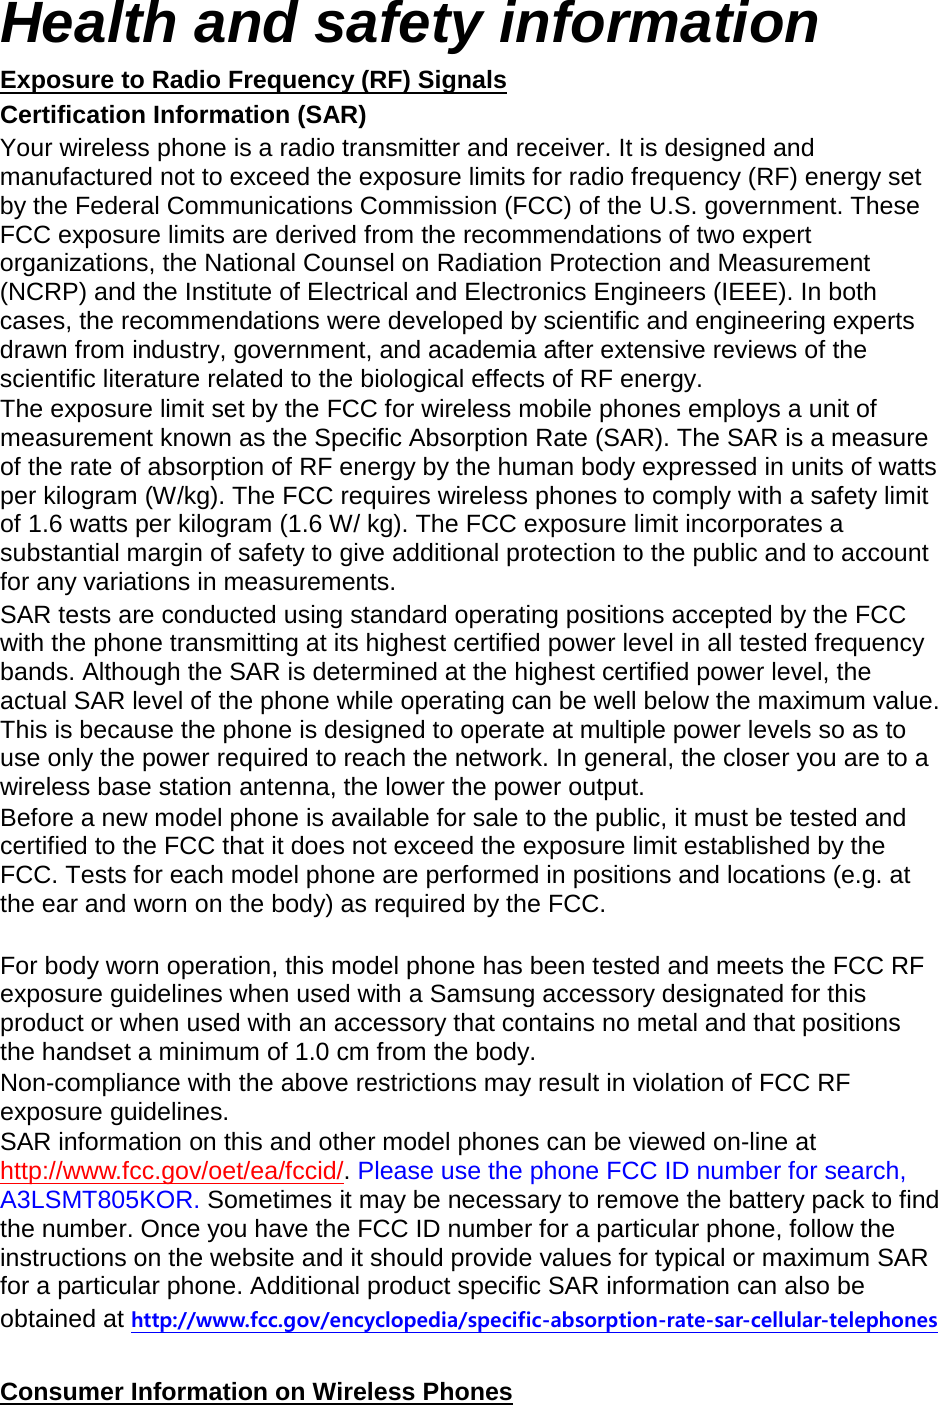 Health and safety information Exposure to Radio Frequency (RF) Signals Certification Information (SAR) Your wireless phone is a radio transmitter and receiver. It is designed and manufactured not to exceed the exposure limits for radio frequency (RF) energy set by the Federal Communications Commission (FCC) of the U.S. government. These FCC exposure limits are derived from the recommendations of two expert organizations, the National Counsel on Radiation Protection and Measurement (NCRP) and the Institute of Electrical and Electronics Engineers (IEEE). In both cases, the recommendations were developed by scientific and engineering experts drawn from industry, government, and academia after extensive reviews of the scientific literature related to the biological effects of RF energy. The exposure limit set by the FCC for wireless mobile phones employs a unit of measurement known as the Specific Absorption Rate (SAR). The SAR is a measure of the rate of absorption of RF energy by the human body expressed in units of watts per kilogram (W/kg). The FCC requires wireless phones to comply with a safety limit of 1.6 watts per kilogram (1.6 W/ kg). The FCC exposure limit incorporates a substantial margin of safety to give additional protection to the public and to account for any variations in measurements. SAR tests are conducted using standard operating positions accepted by the FCC with the phone transmitting at its highest certified power level in all tested frequency bands. Although the SAR is determined at the highest certified power level, the actual SAR level of the phone while operating can be well below the maximum value. This is because the phone is designed to operate at multiple power levels so as to use only the power required to reach the network. In general, the closer you are to a wireless base station antenna, the lower the power output. Before a new model phone is available for sale to the public, it must be tested and certified to the FCC that it does not exceed the exposure limit established by the FCC. Tests for each model phone are performed in positions and locations (e.g. at the ear and worn on the body) as required by the FCC.      For body worn operation, this model phone has been tested and meets the FCC RF exposure guidelines when used with a Samsung accessory designated for this product or when used with an accessory that contains no metal and that positions the handset a minimum of 1.0 cm from the body.   Non-compliance with the above restrictions may result in violation of FCC RF exposure guidelines. SAR information on this and other model phones can be viewed on-line at http://www.fcc.gov/oet/ea/fccid/. Please use the phone FCC ID number for search, A3LSMT805KOR. Sometimes it may be necessary to remove the battery pack to find the number. Once you have the FCC ID number for a particular phone, follow the instructions on the website and it should provide values for typical or maximum SAR for a particular phone. Additional product specific SAR information can also be obtained at http://www.fcc.gov/encyclopedia/specific-absorption-rate-sar-cellular-telephones  Consumer Information on Wireless Phones 